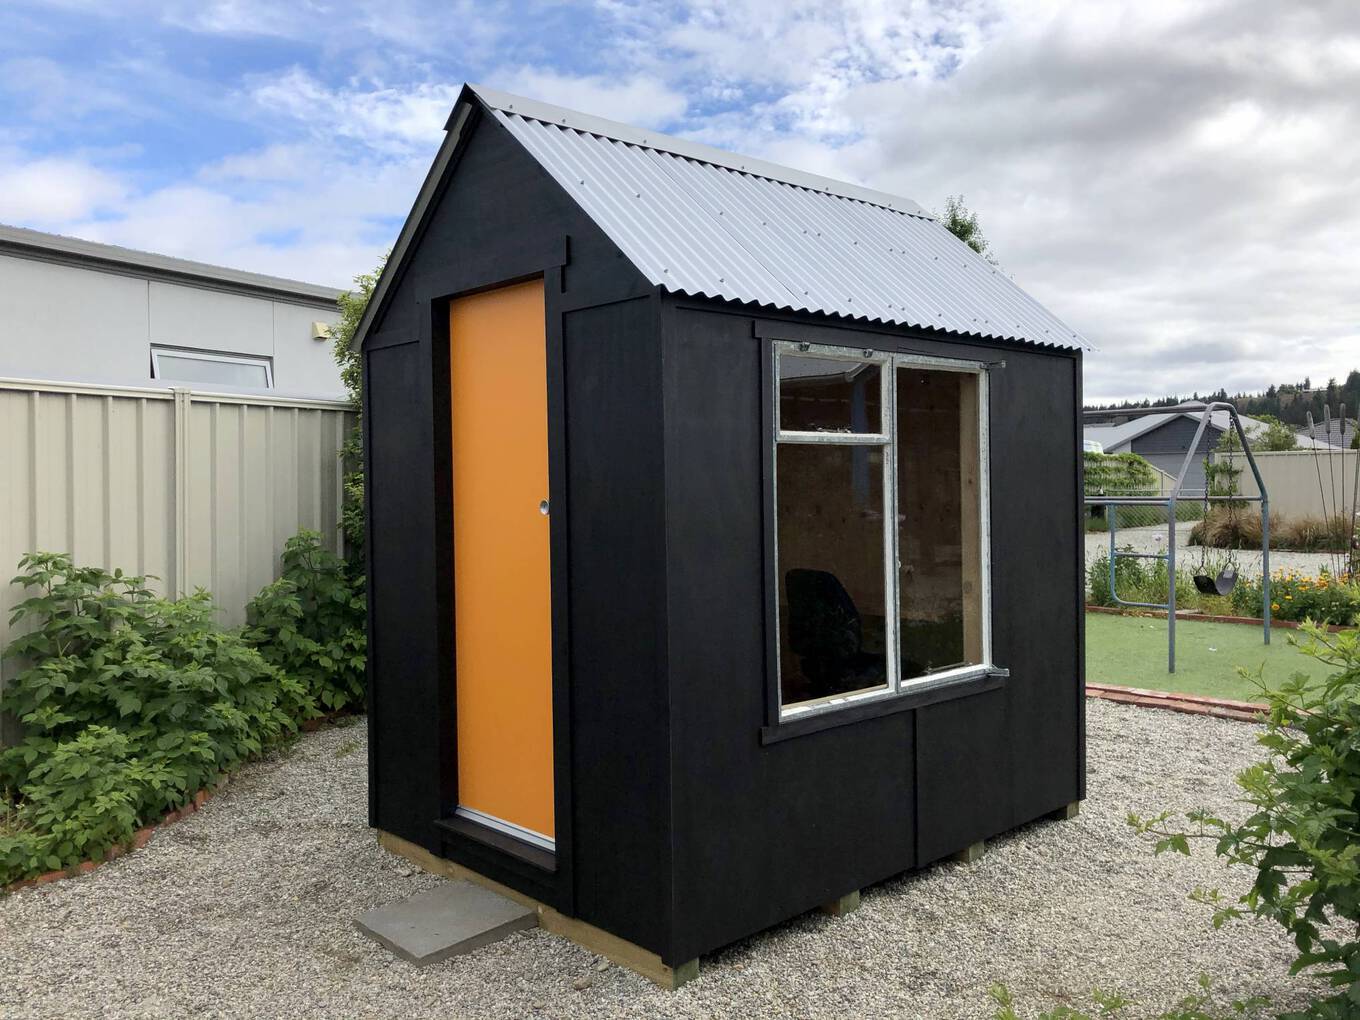 A photo of the finished Writer's Studio - it has a corrugated iron roof, orange door and is painted black with a big window on the side